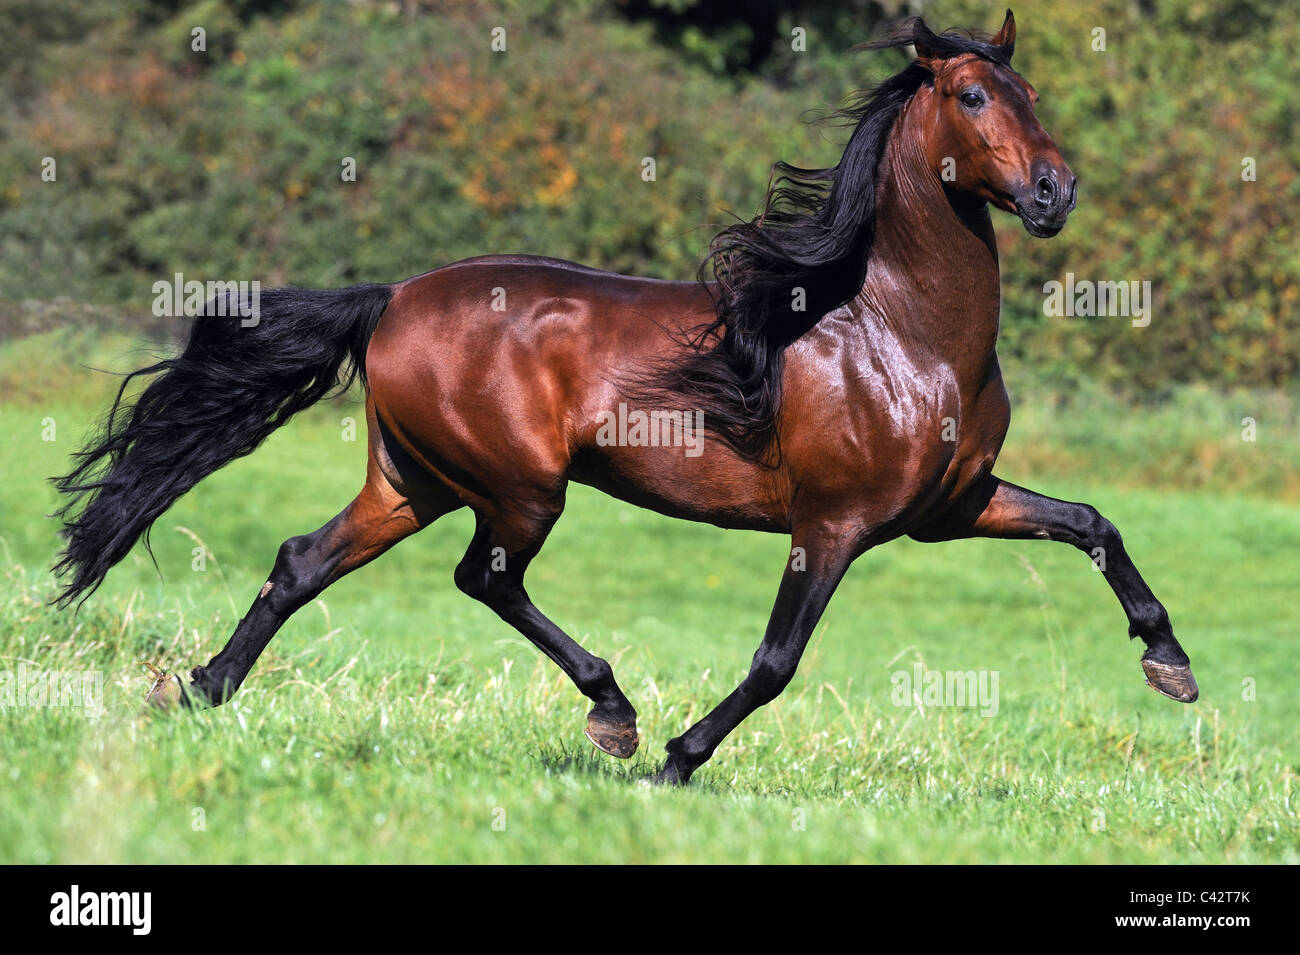 Andalusian Horse (Equus ferus caballus). Bay stallion at a trot on a meadow. Germany. Stock Photo